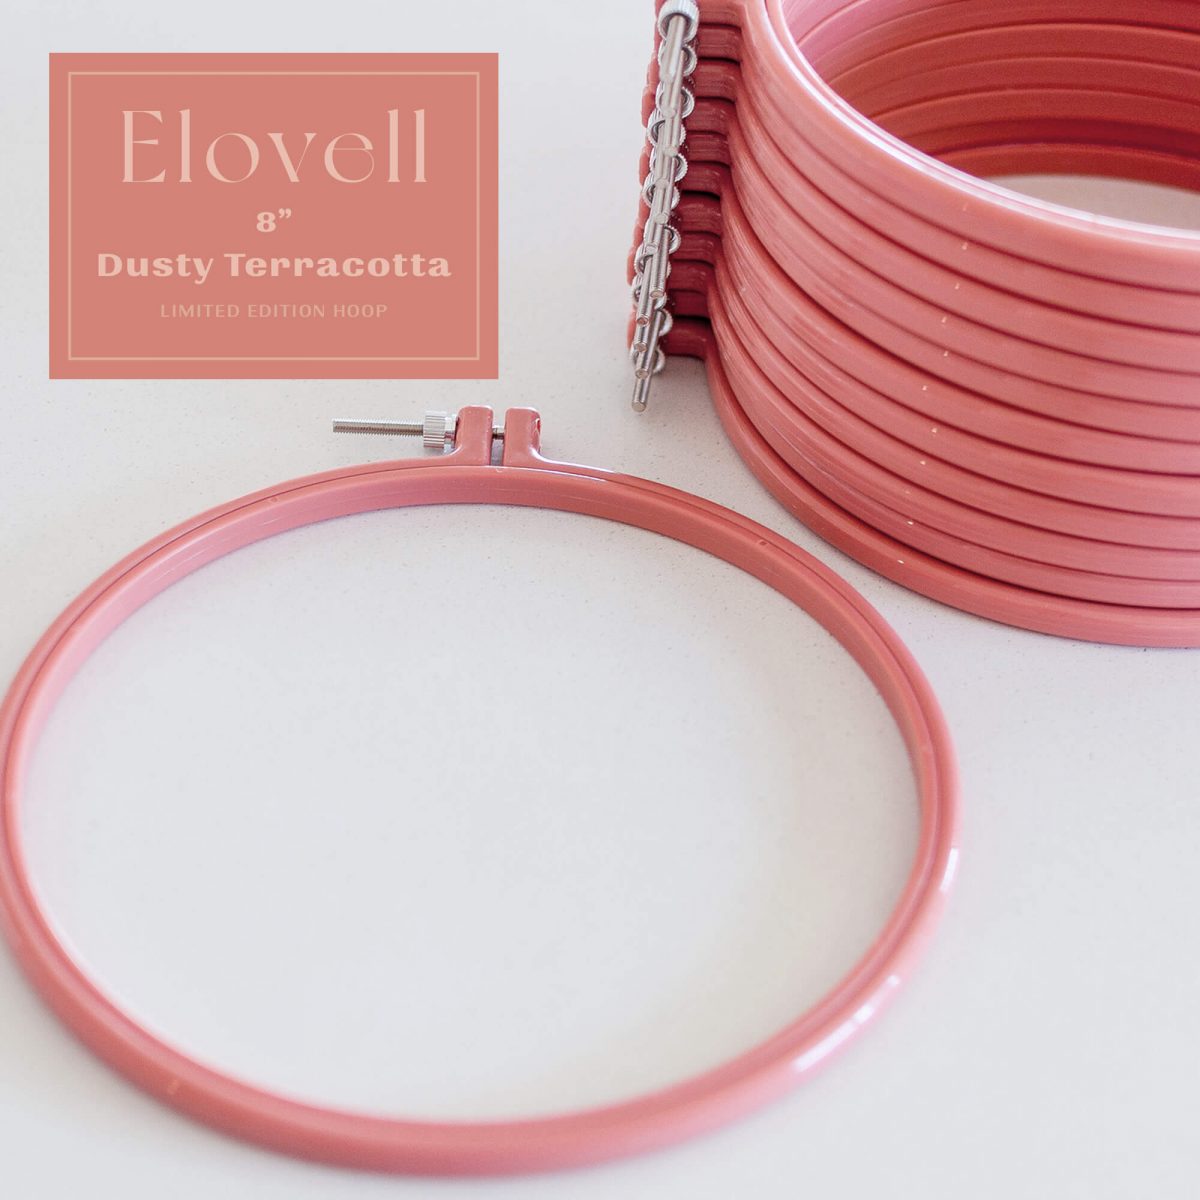 Elovell Embroidery Hoops Sedona Collection